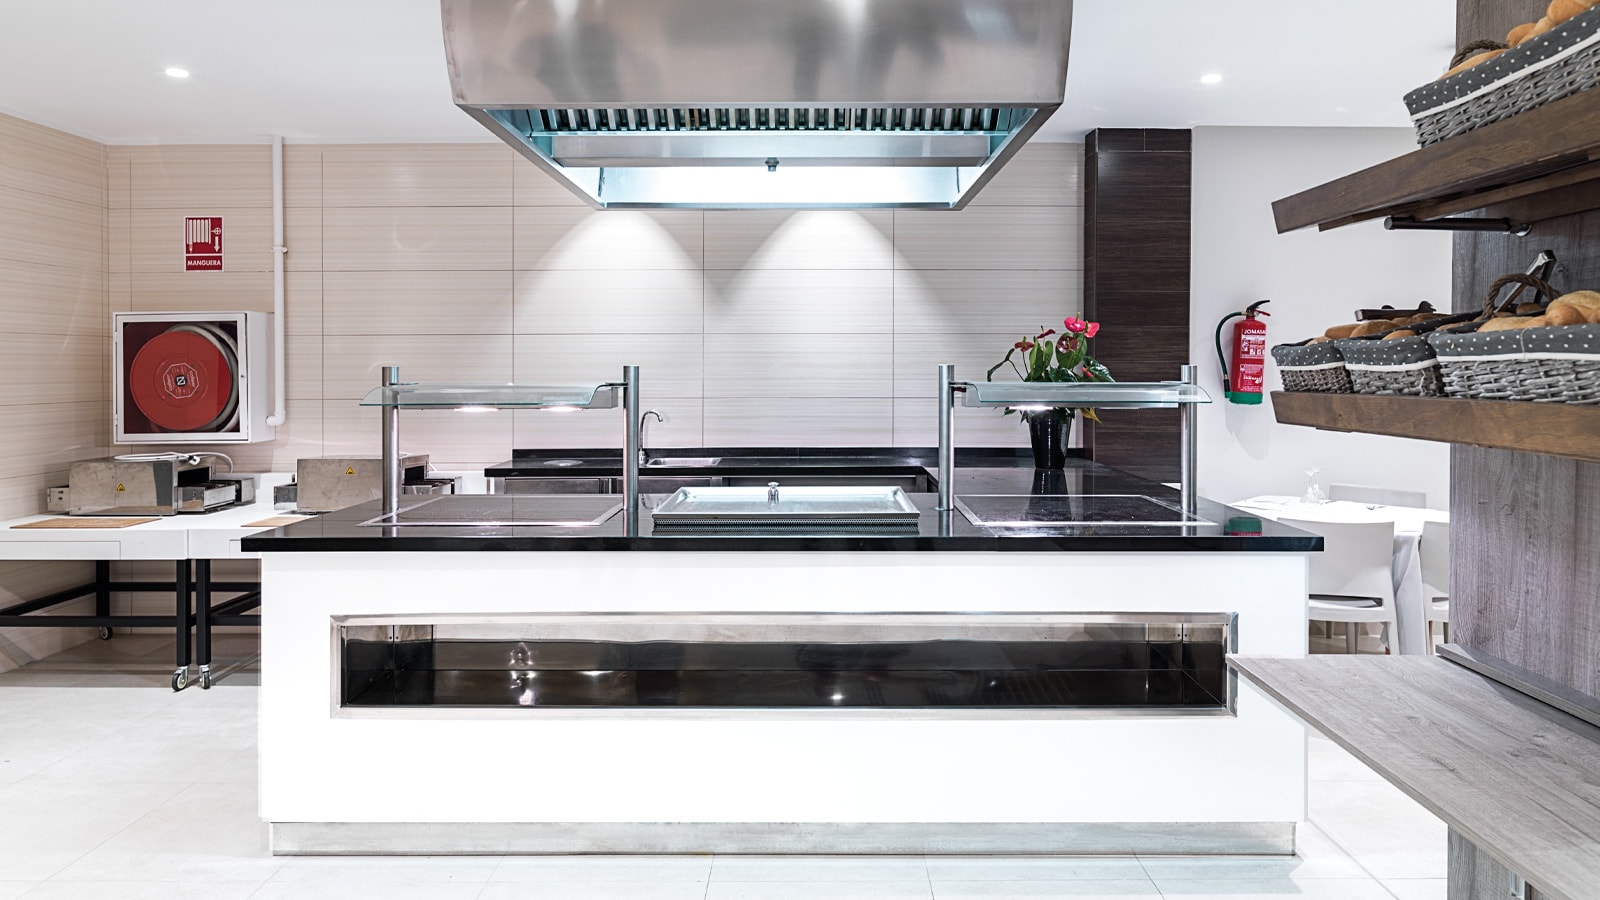 Gamadecor's industrial kitchens for 2022